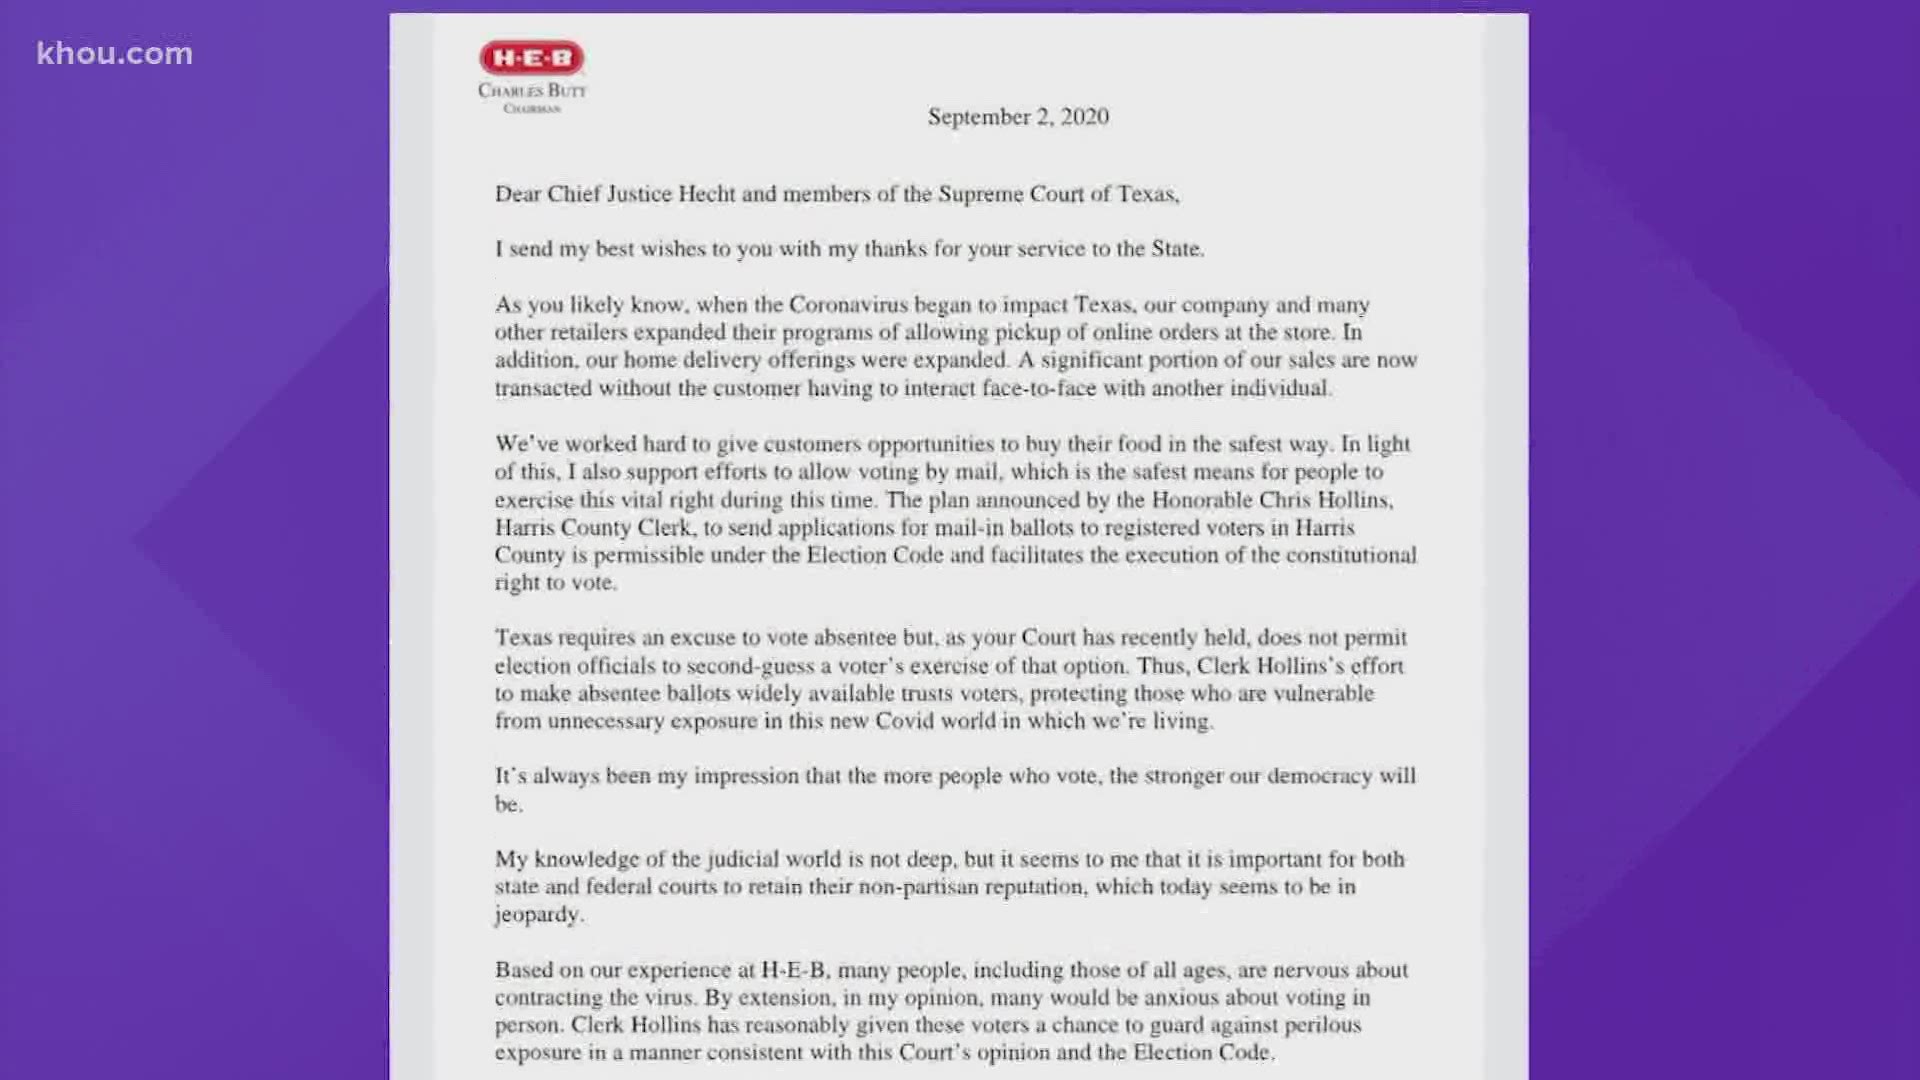 H-E-B CEO Charles Butt is siding with the Harris County clerk's attempt to send mail-in voting applications to all 2.4 million registered voters in the county.